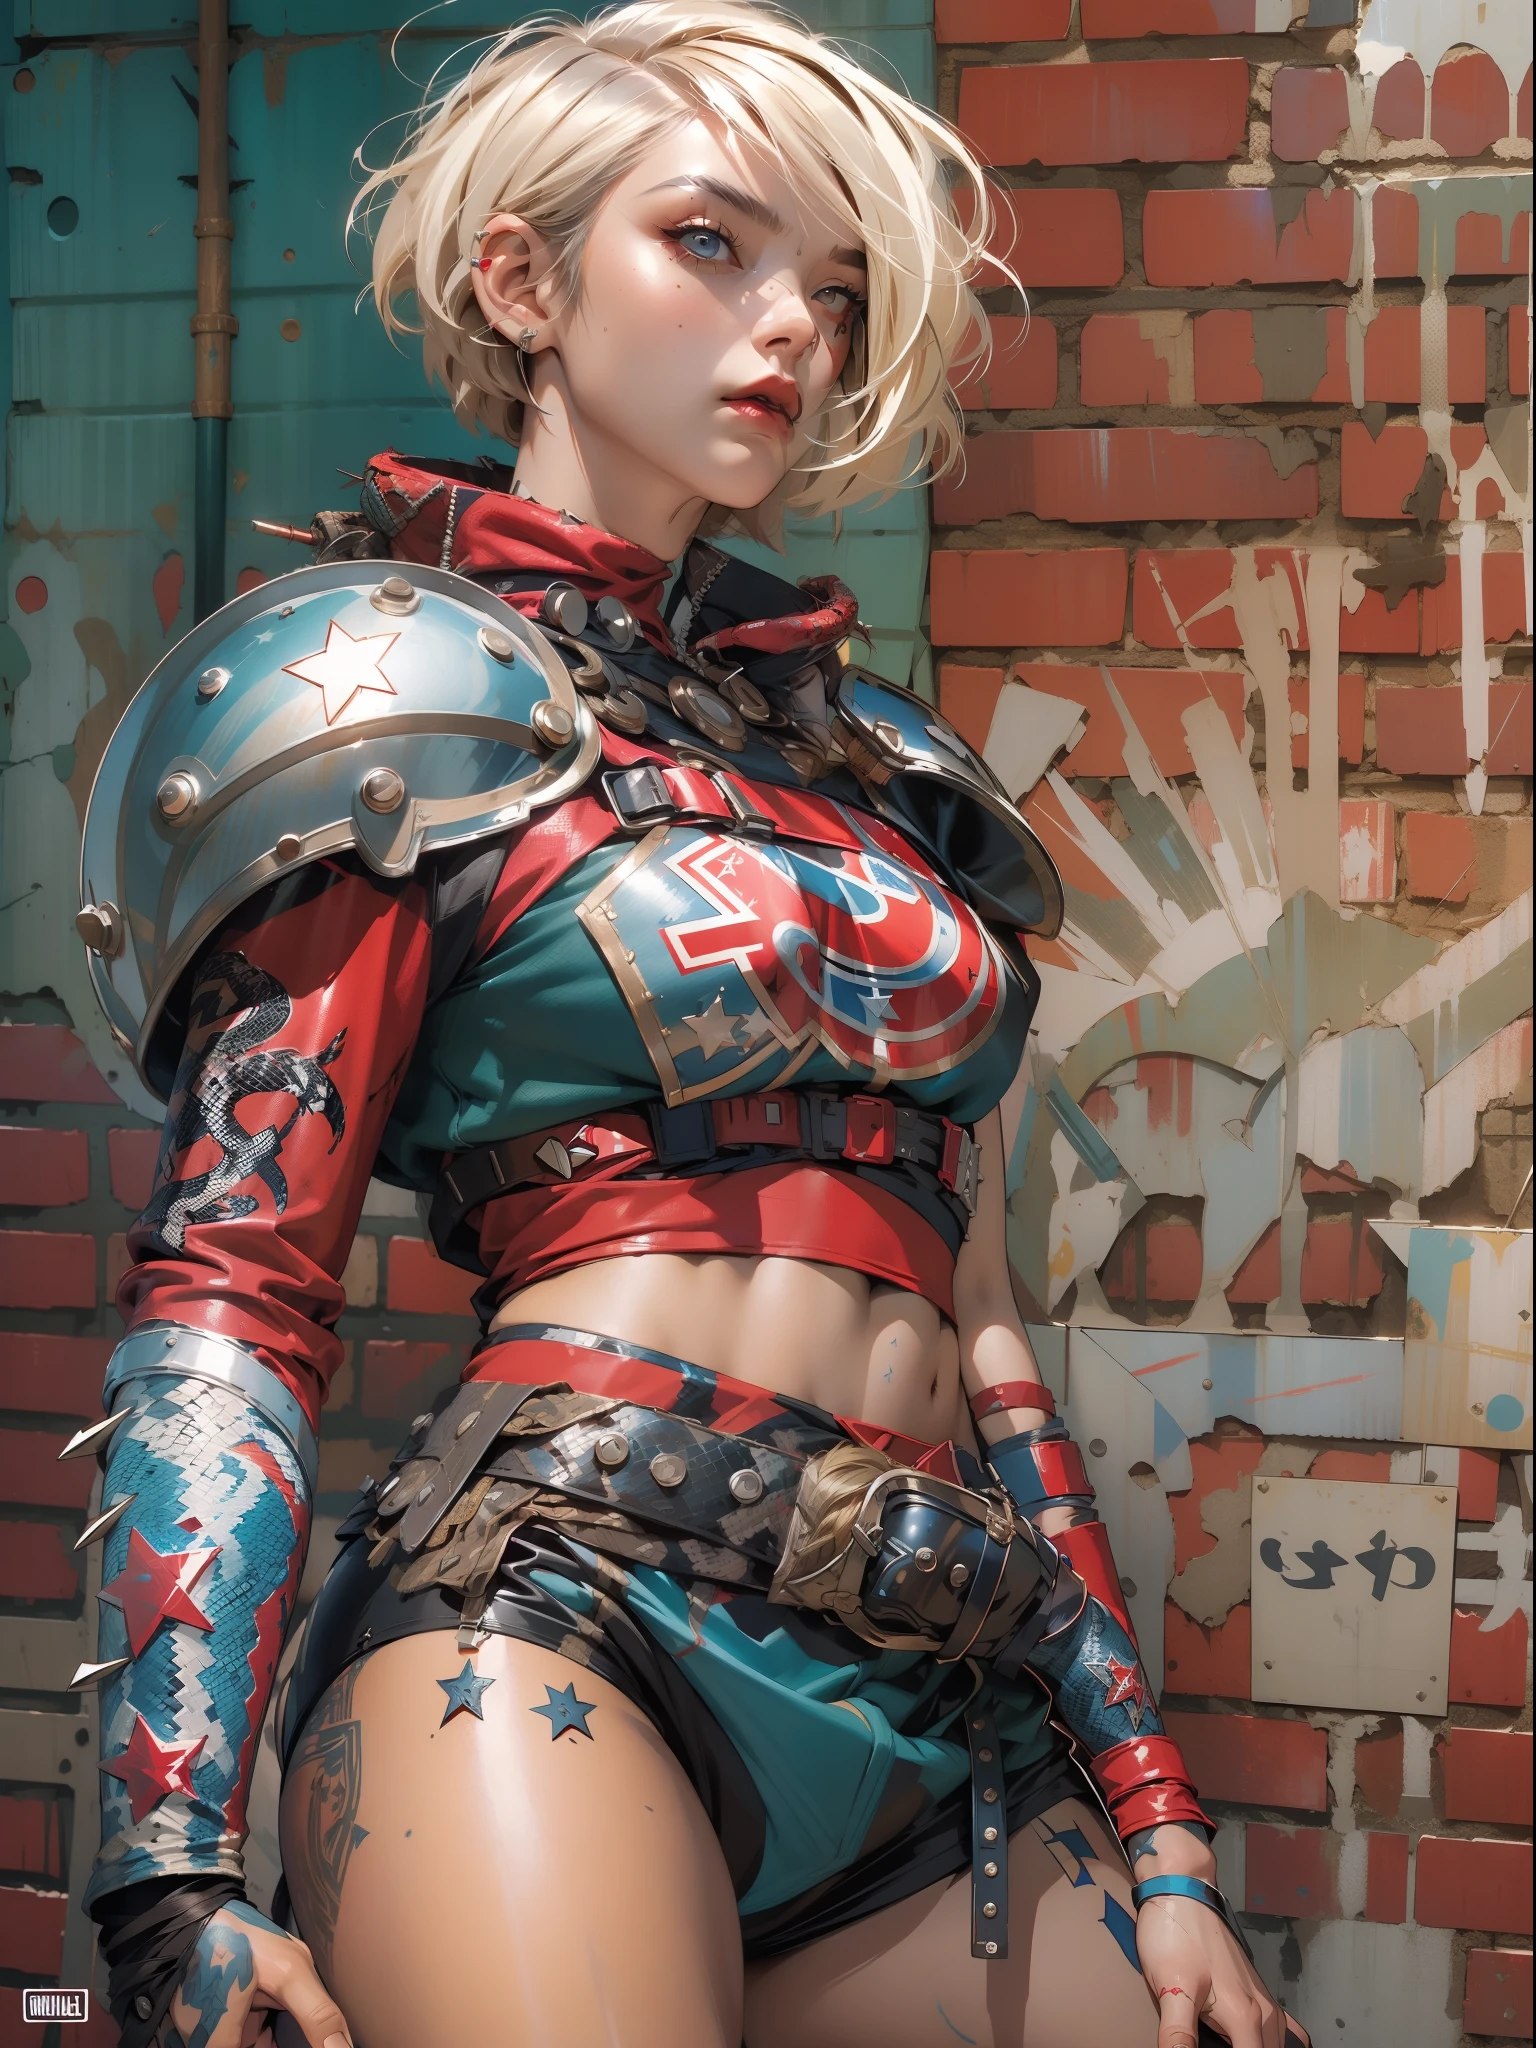 (((woman))), (((best quality))), (((masterpiece))), (((adult))), (((1girl))), (((bob haircut) )), A 25 year old female cyberpunk gladiator with perfect body, shoulder pads with metal spines, Brooklyn Gladiators, ((bob haircut)), tiny leather panties, torn rugby team t-shirt, almost naked in wild urban style by Simon Bisley for the cover of Heavy Metal magazine, Short blonde hair, Minimum clothing, Metal protection on the left arm with intricate graphics, Dark red with white stars and blue and white striped pattern, armor, full of spikes and rivets, tattoo of snake (((from the knee up))), short white blonde hair, in the background a wall painted by Shepard Fairey with an intricate design